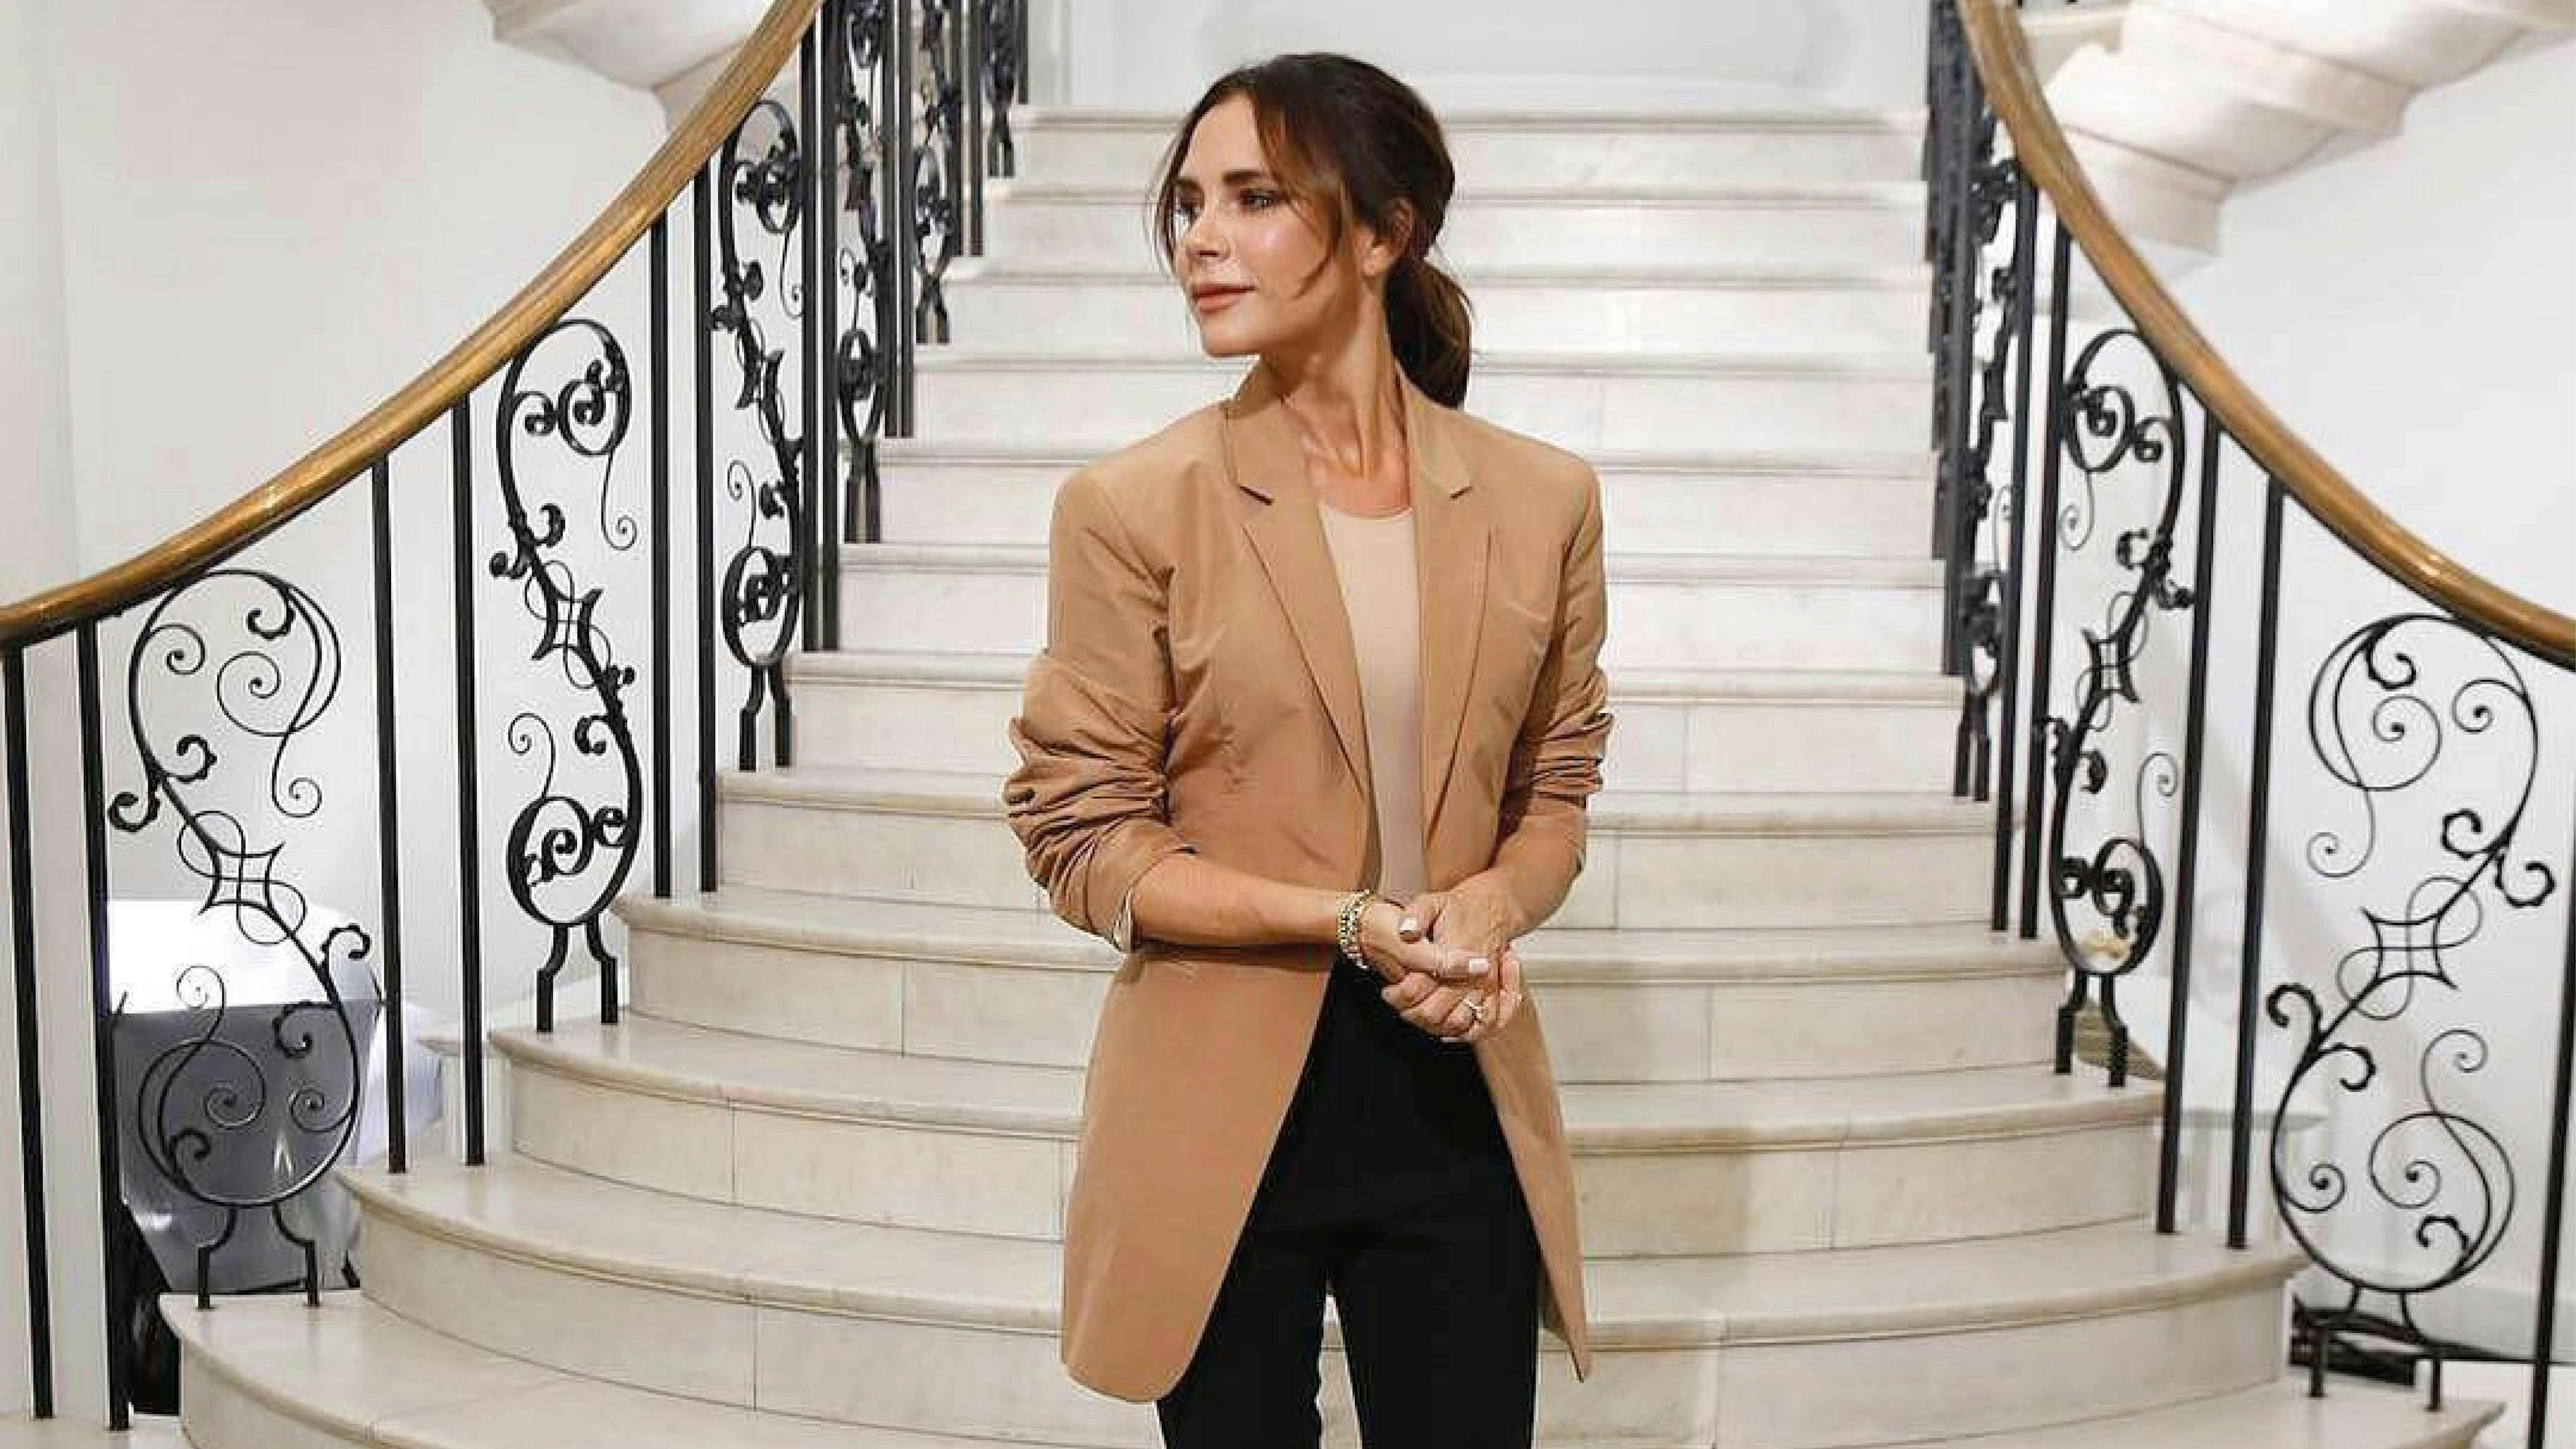 clothing apparel person overcoat coat blazer jacket staircase handrail female